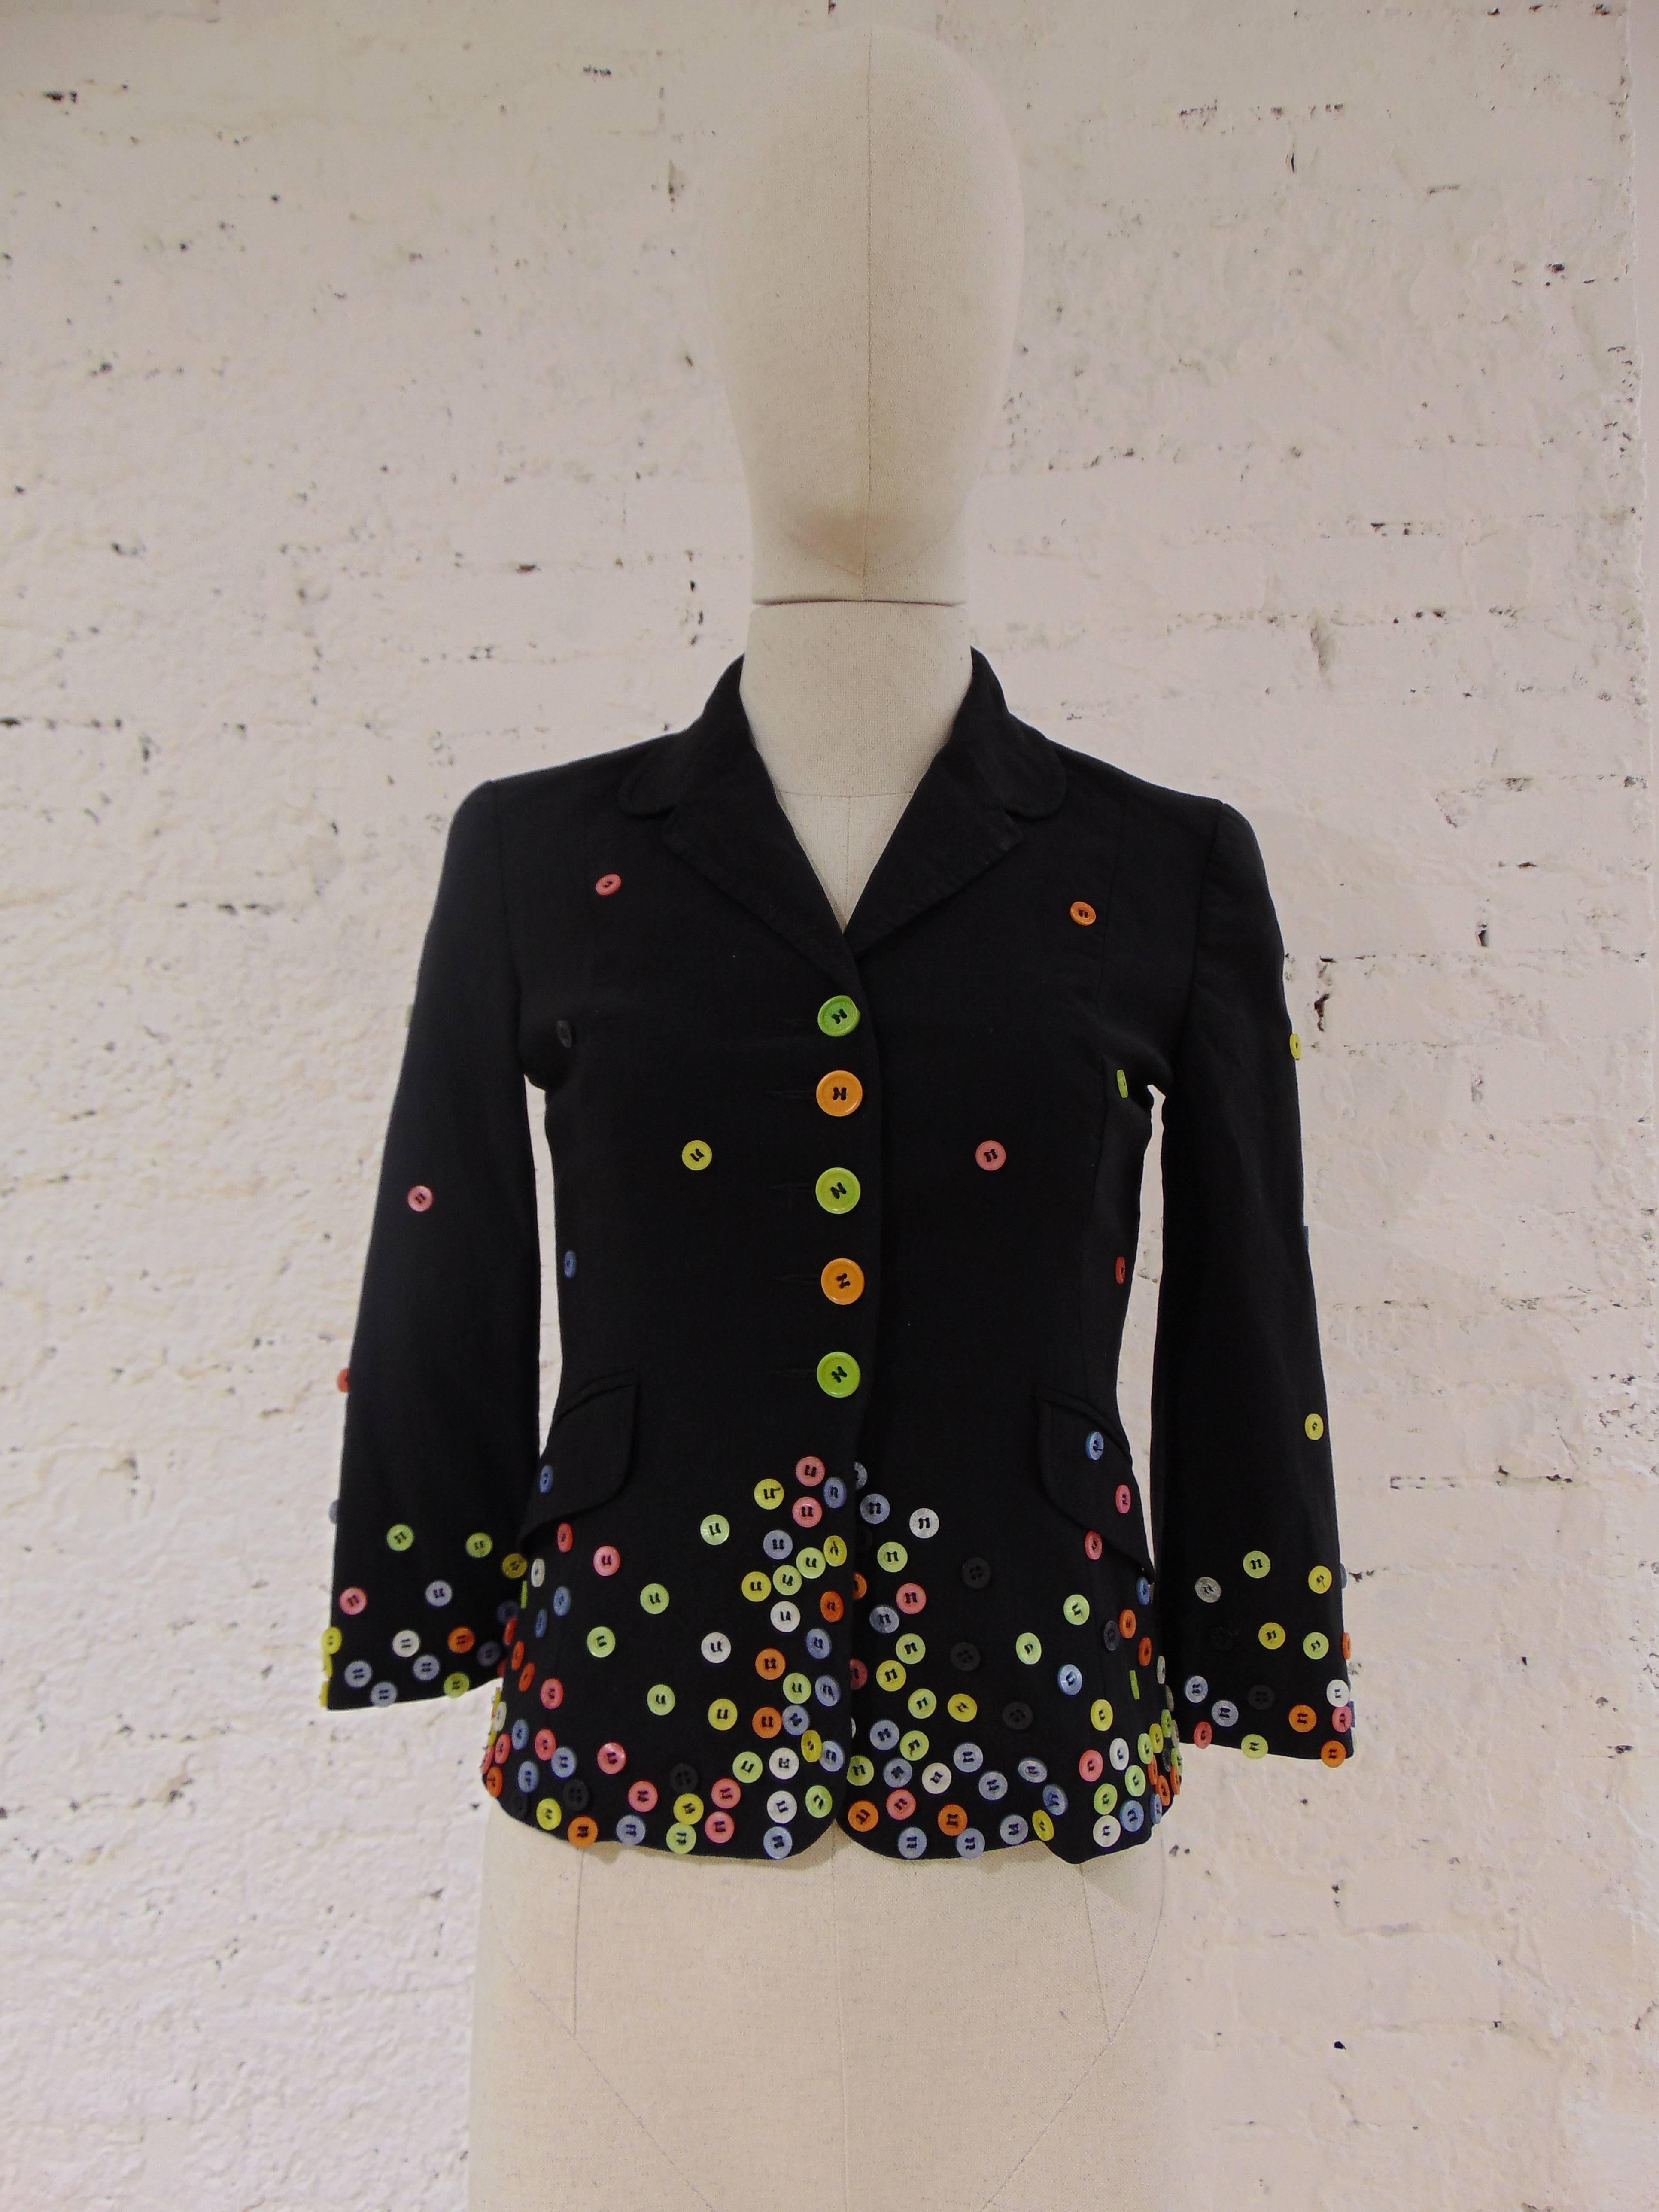 Moschino black bottons jacket

totally made in italy
overall multicoloured bottons
composition: viscose and others
size: S